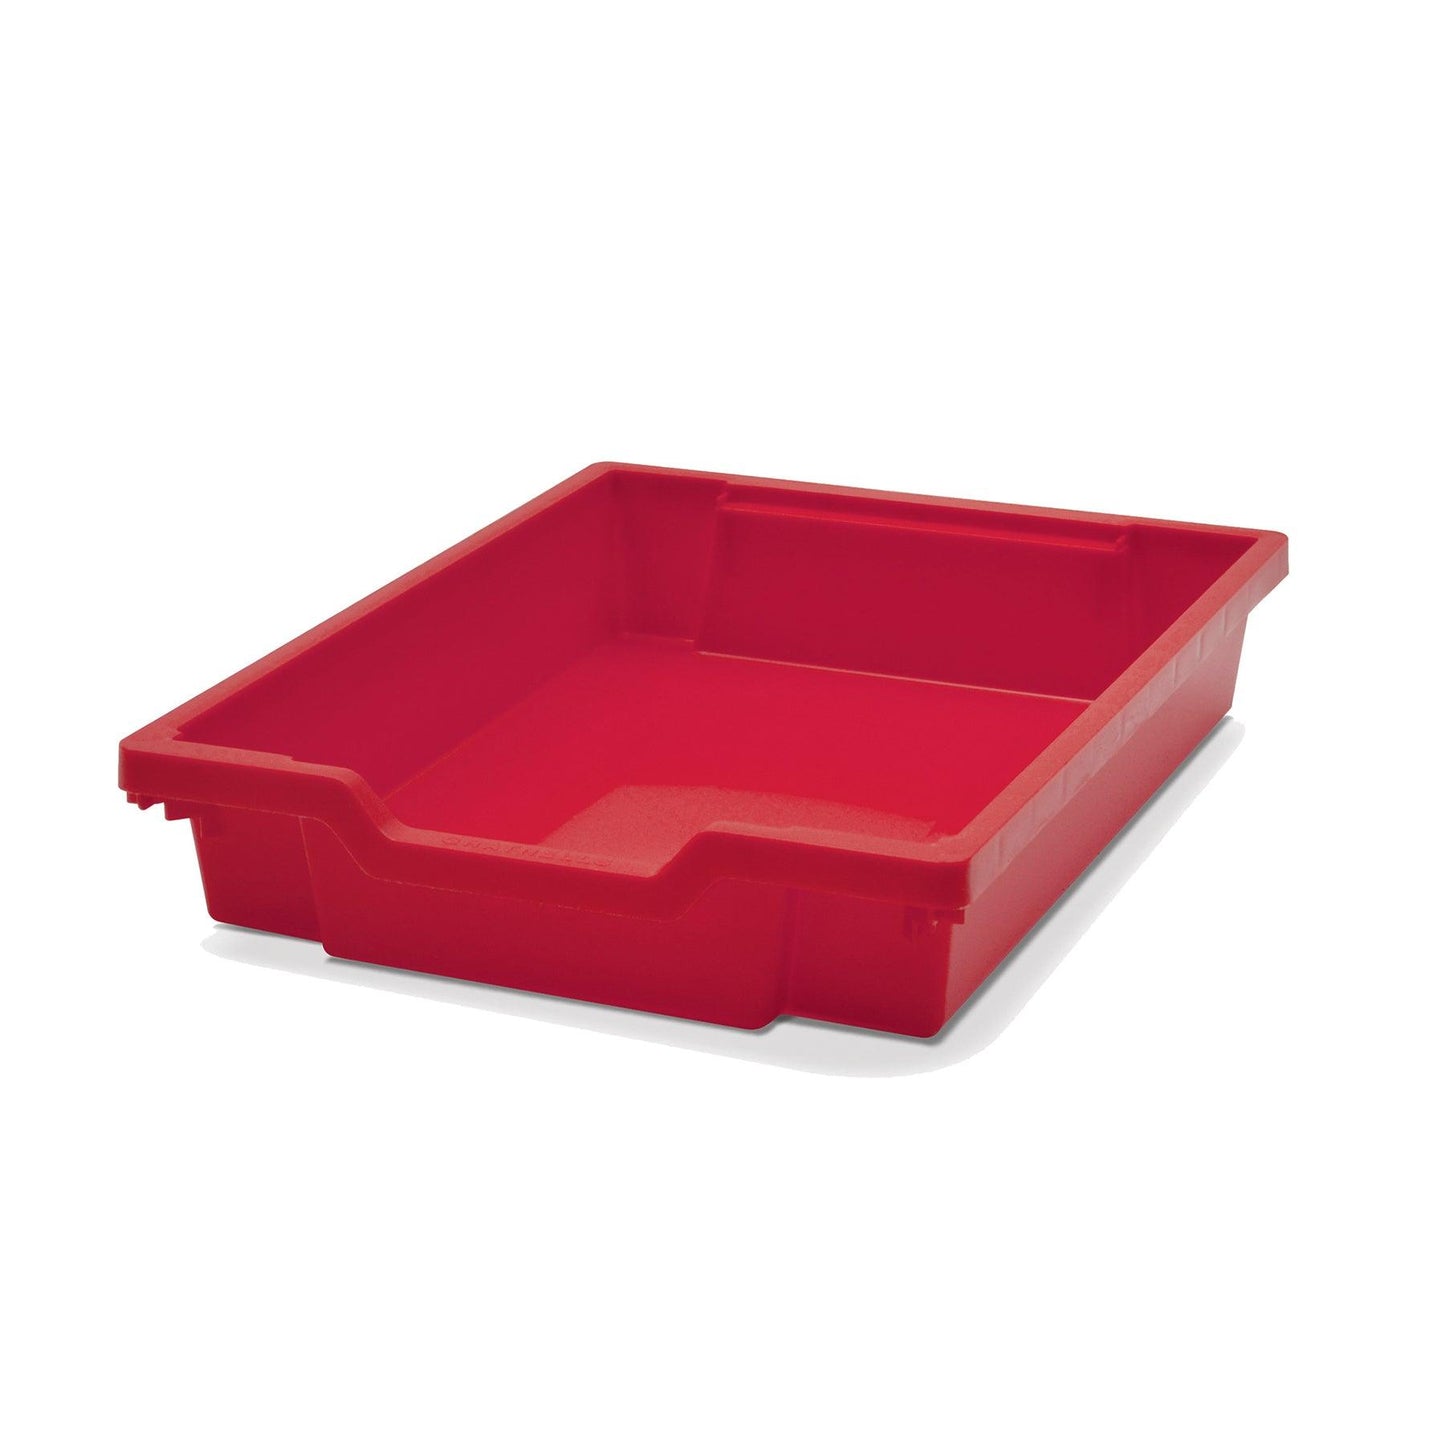 Shallow F1 Tray, Flame Red, 12.3" x 16.8" x 3", Heavy Duty School, Industrial & Utility Bins, Pack of 8 - Loomini